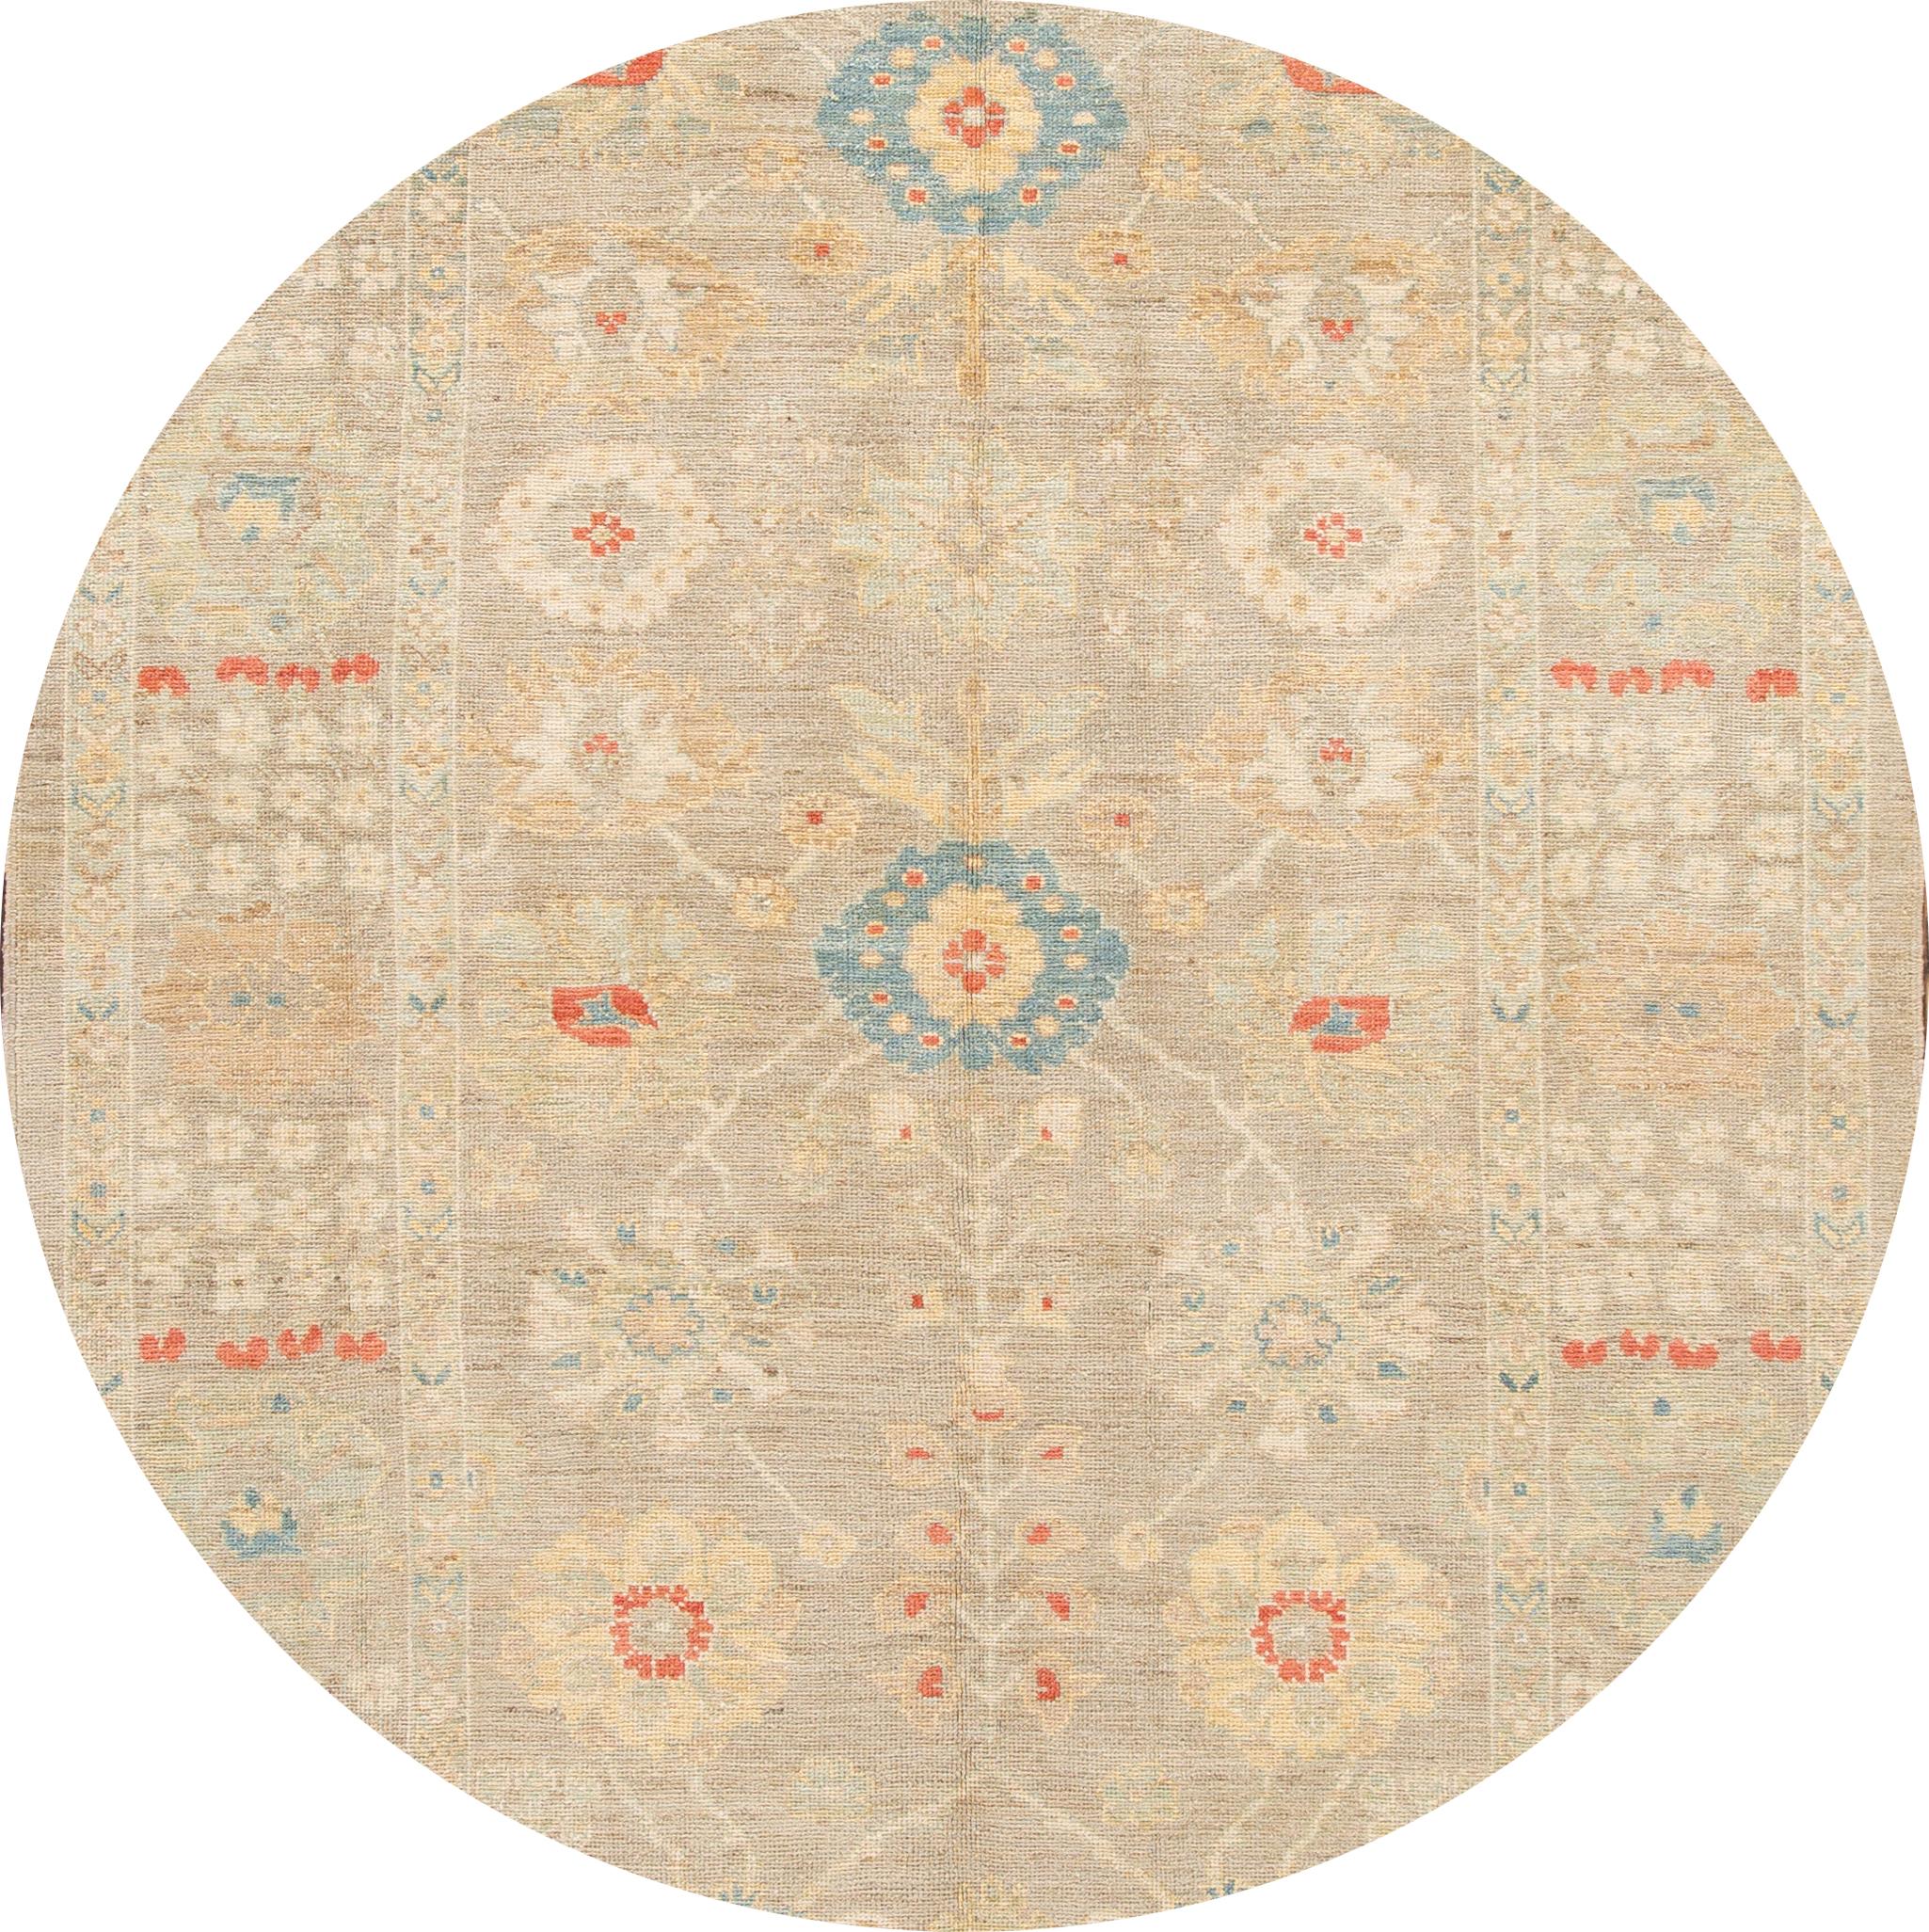 Beautiful contemporary  Sultanabad rug, hand-knotted wool with a tan field, blue, red and ivory accents,
This rug measures: 6' 08